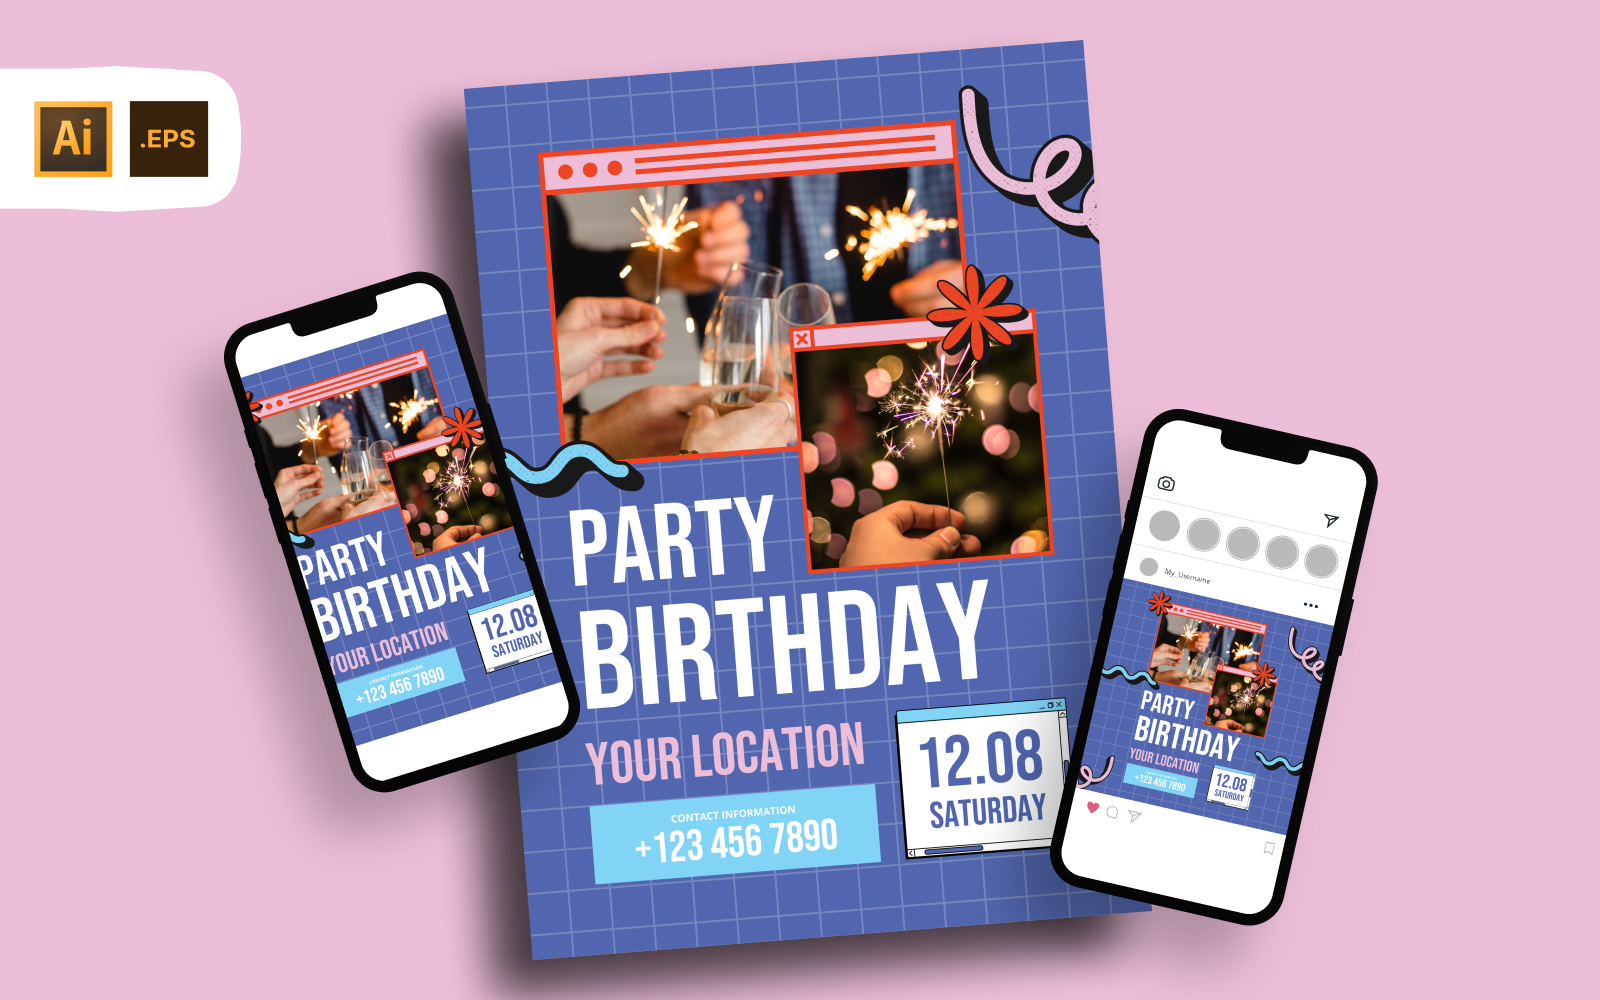 Template #367477 Birthday Party Webdesign Template - Logo template Preview